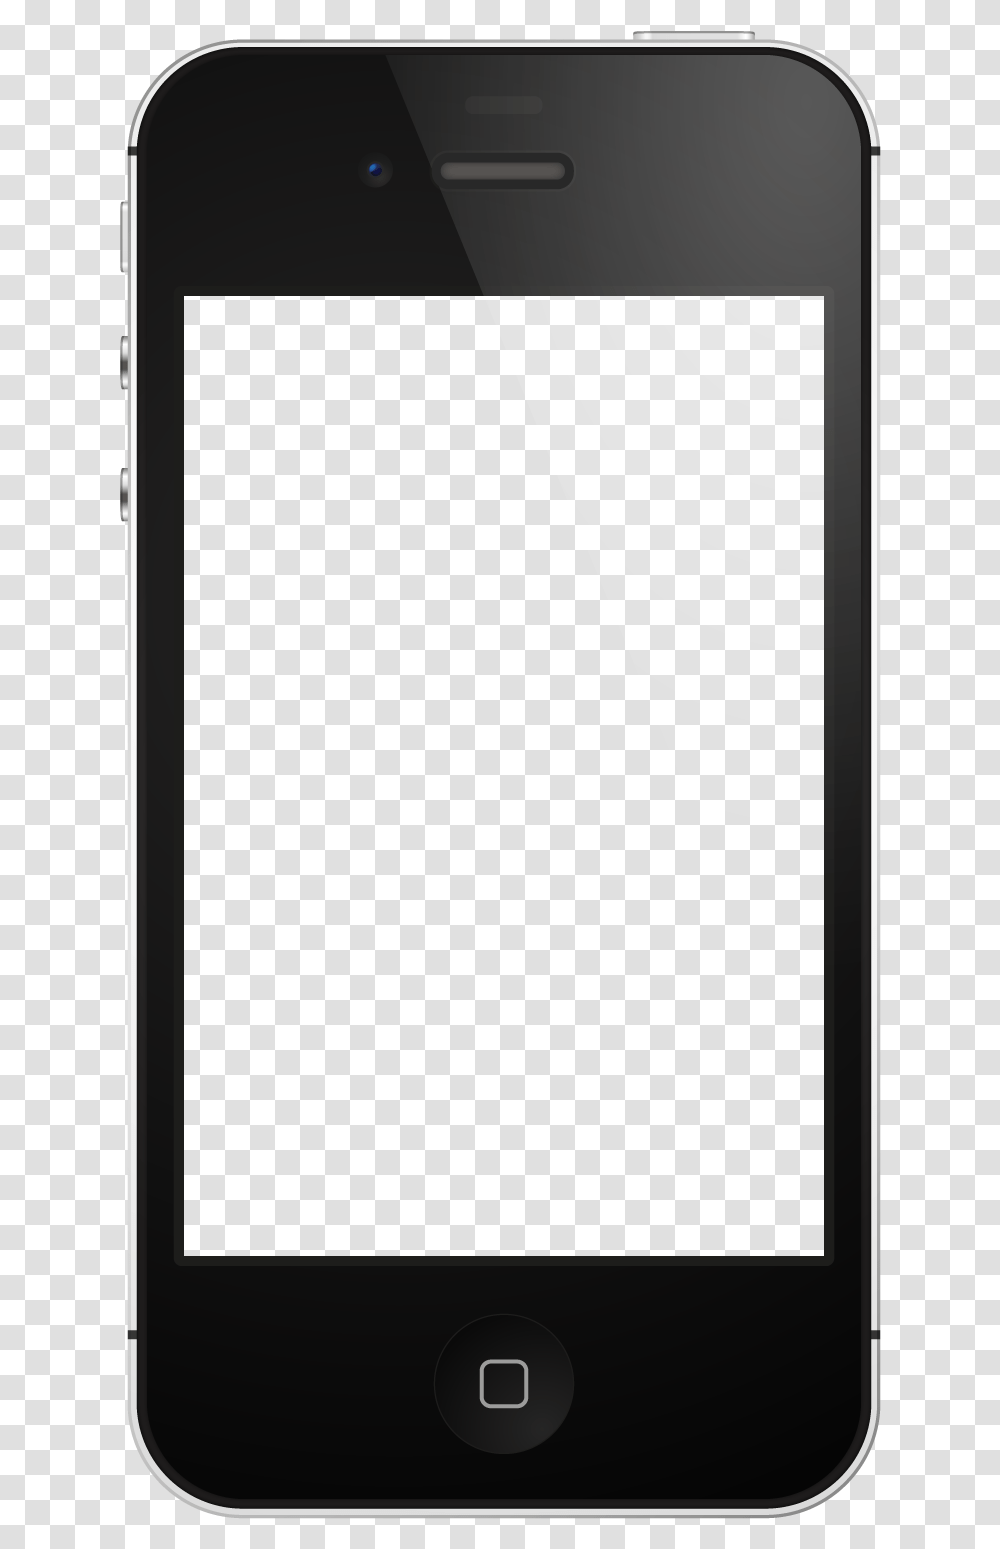 Cliparts For Free Download Blank Cell Phone Template, Mobile Phone, Electronics, Iphone Transparent Png